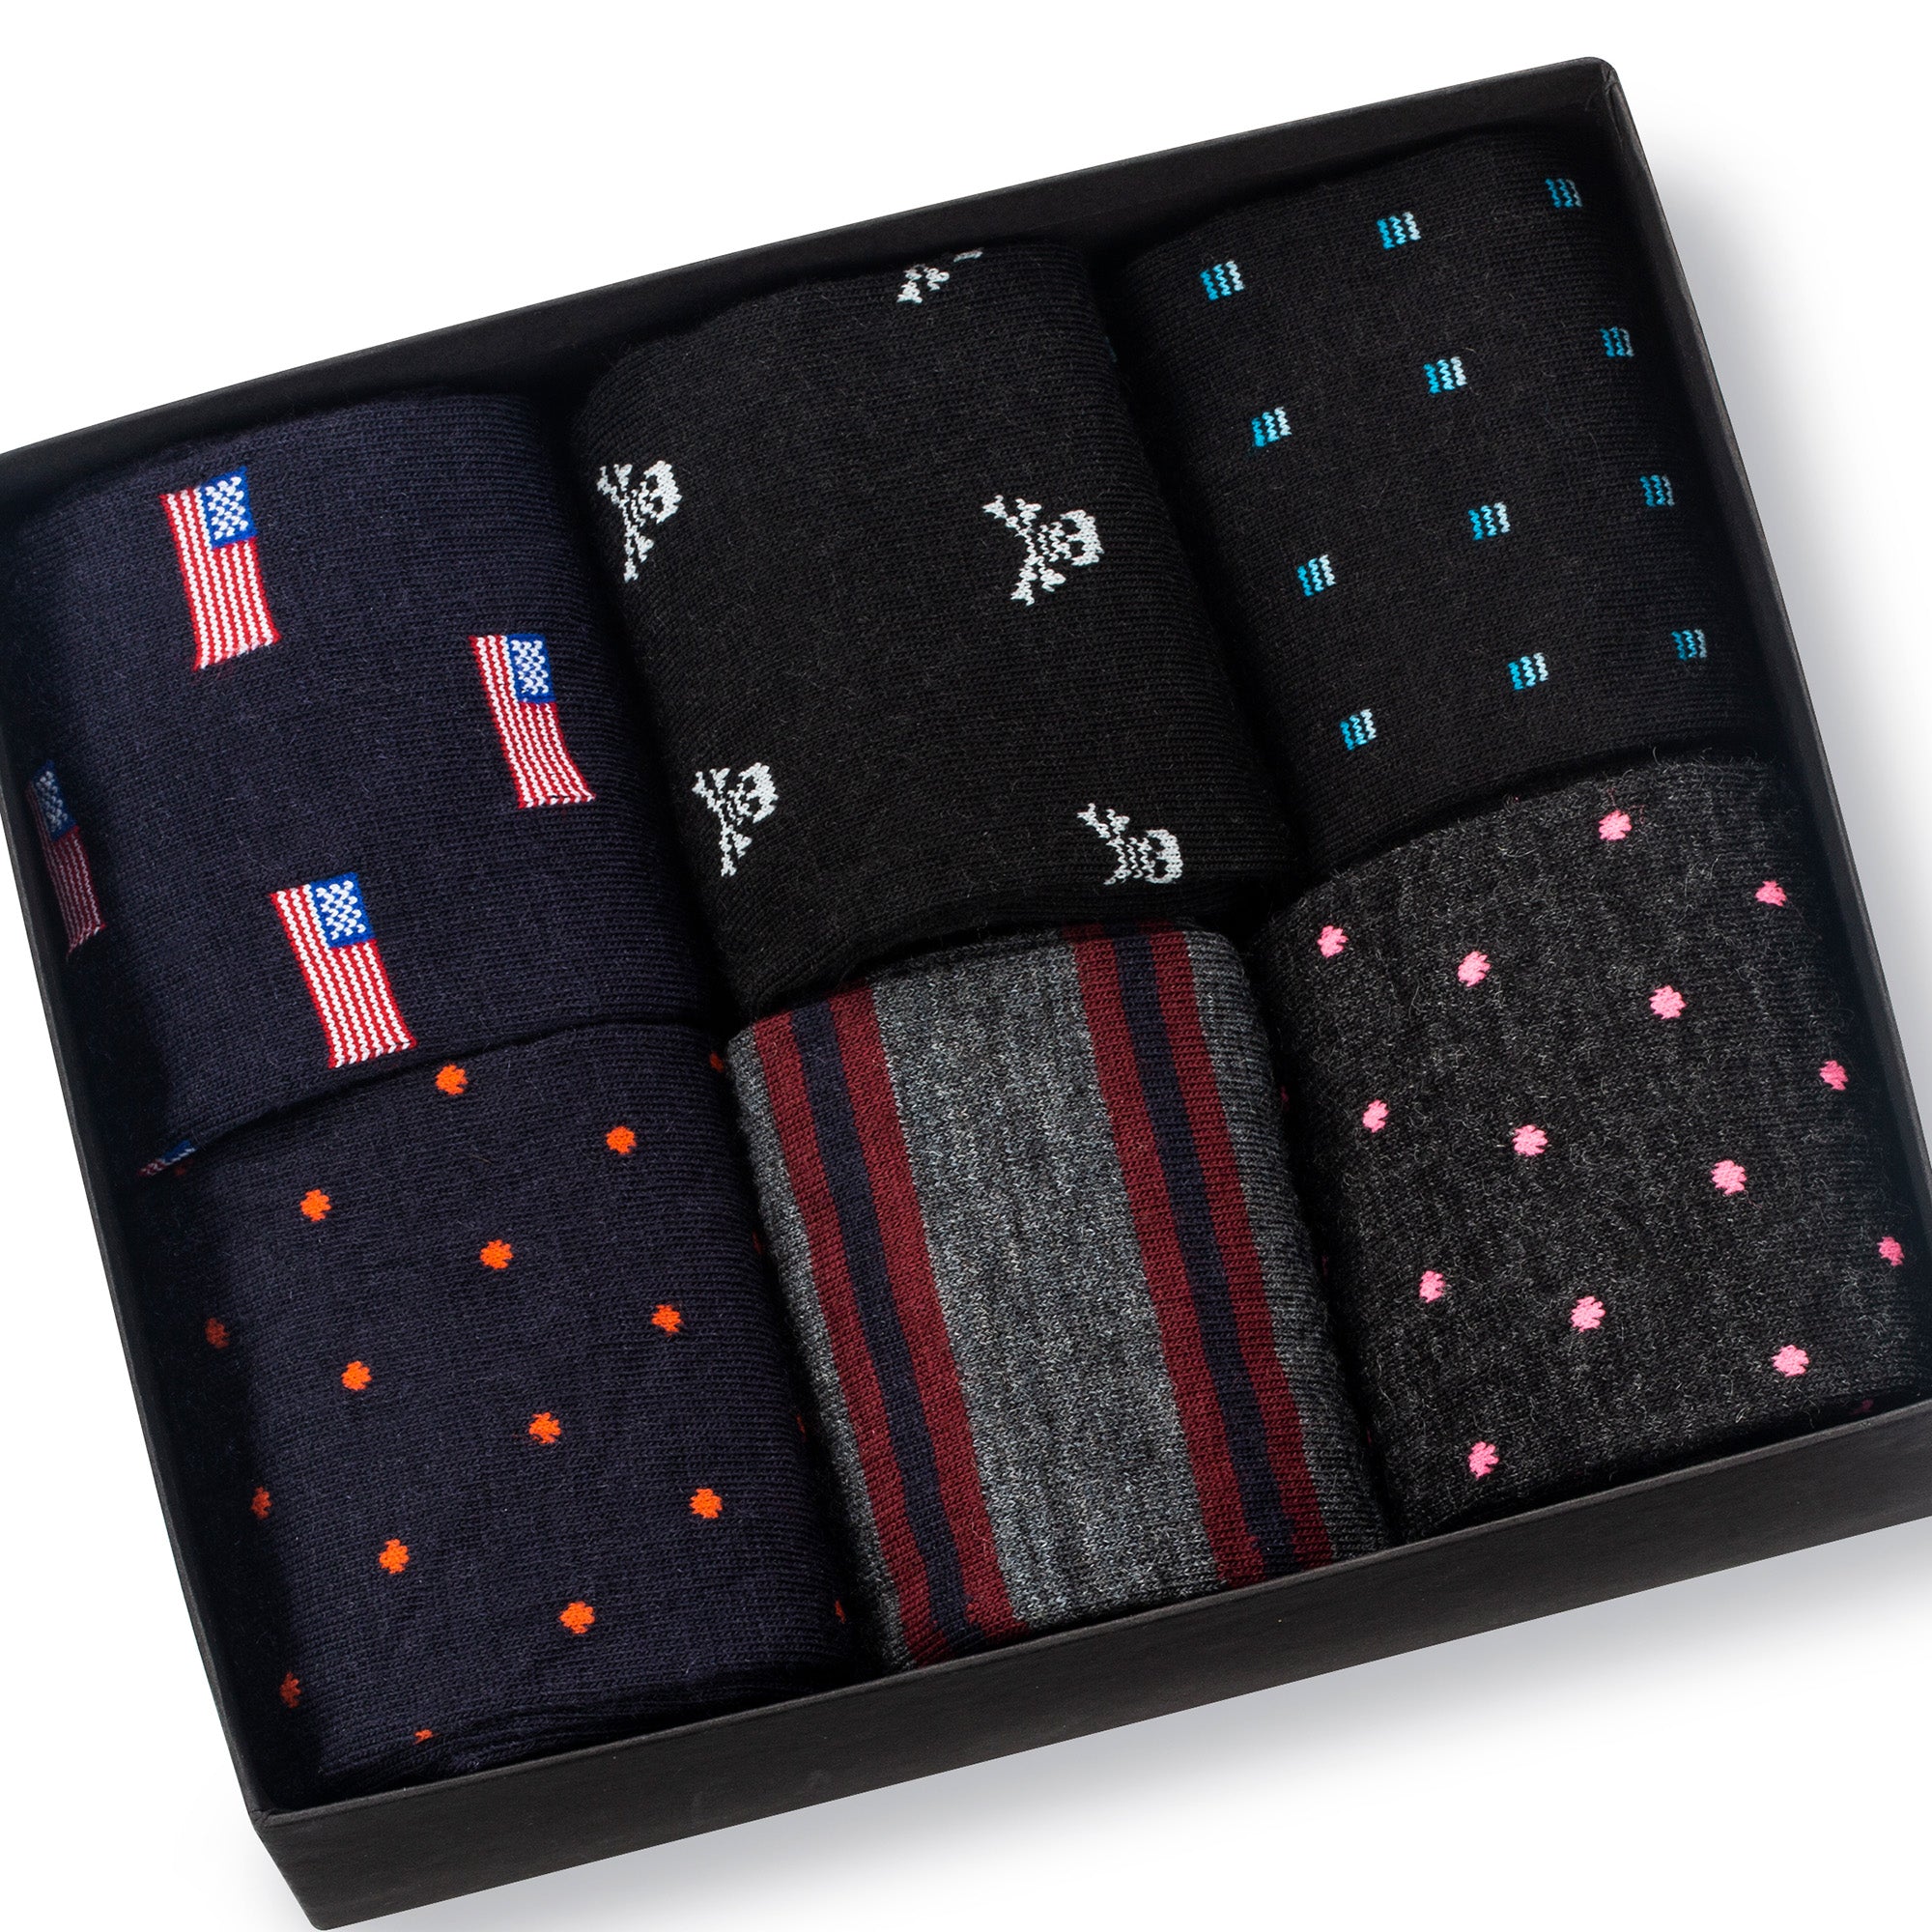 six pairs of wool patterned dress socks arranged in a black gift box